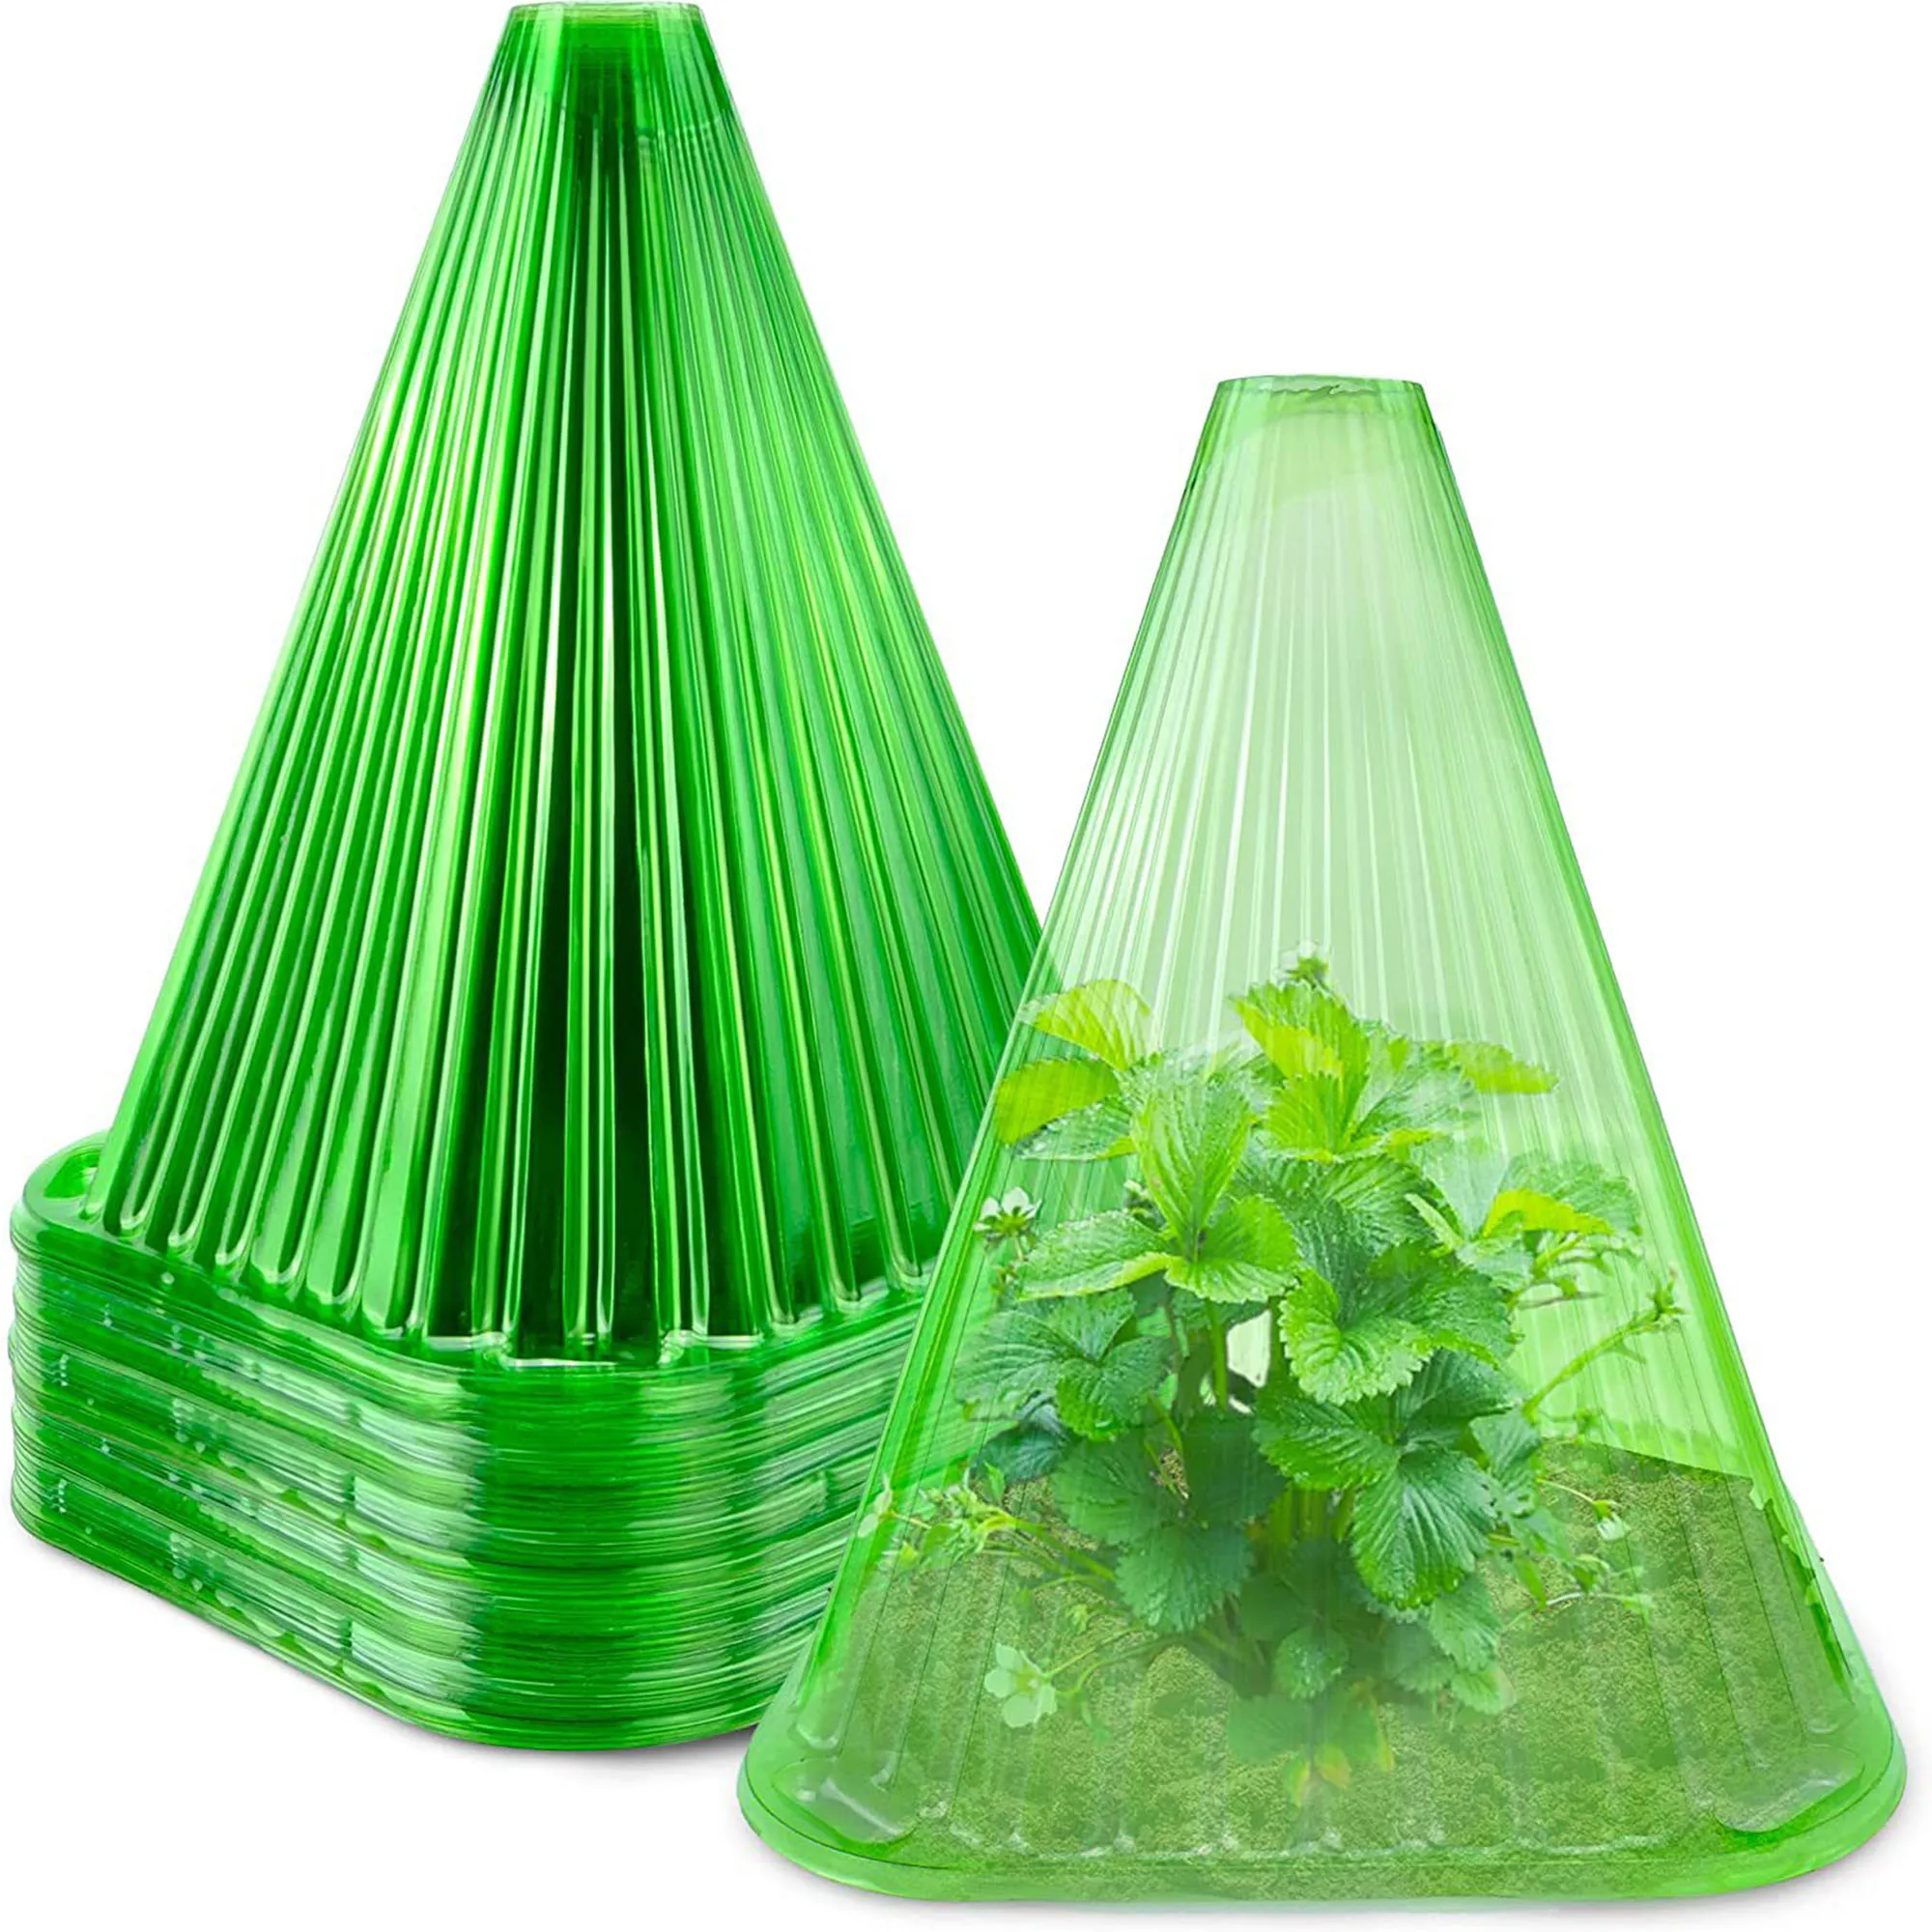 Garden Cloches for Plants Reusable Multifunctional Plant Bell Covers Plant Covers Protectors Transparent from Birds Frost Freeze